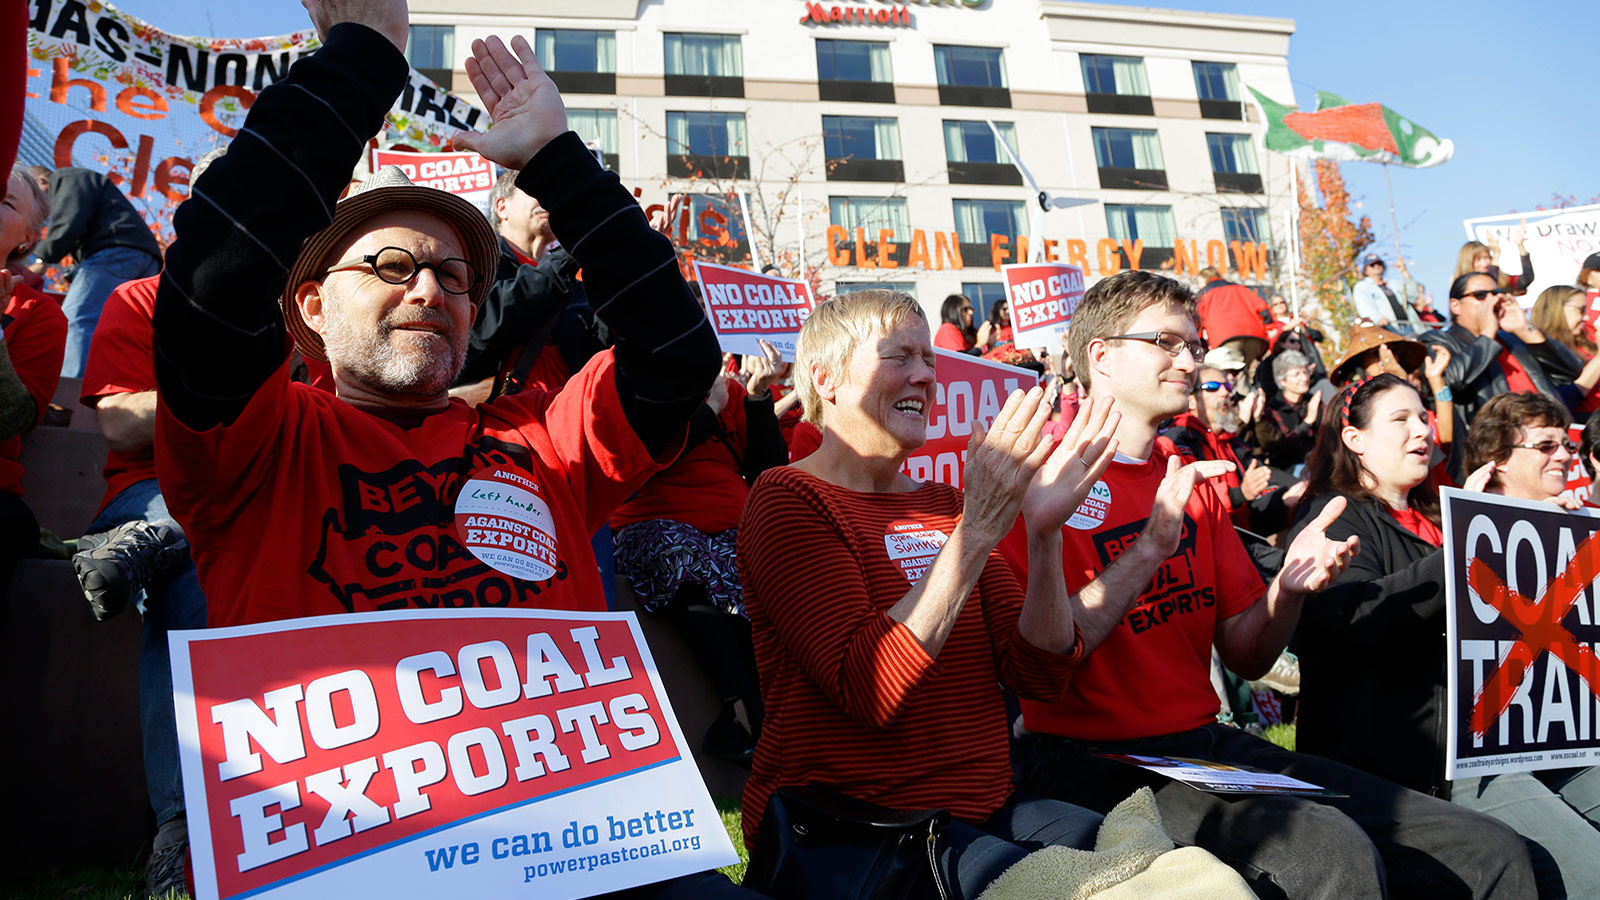 Russ Childers, left, of Seattle, sits among other protesters as they demonstrate against trains carrying coal for export moving through Washington state on Thursday, Oct. 17, 2013, in Tacoma, Wash.